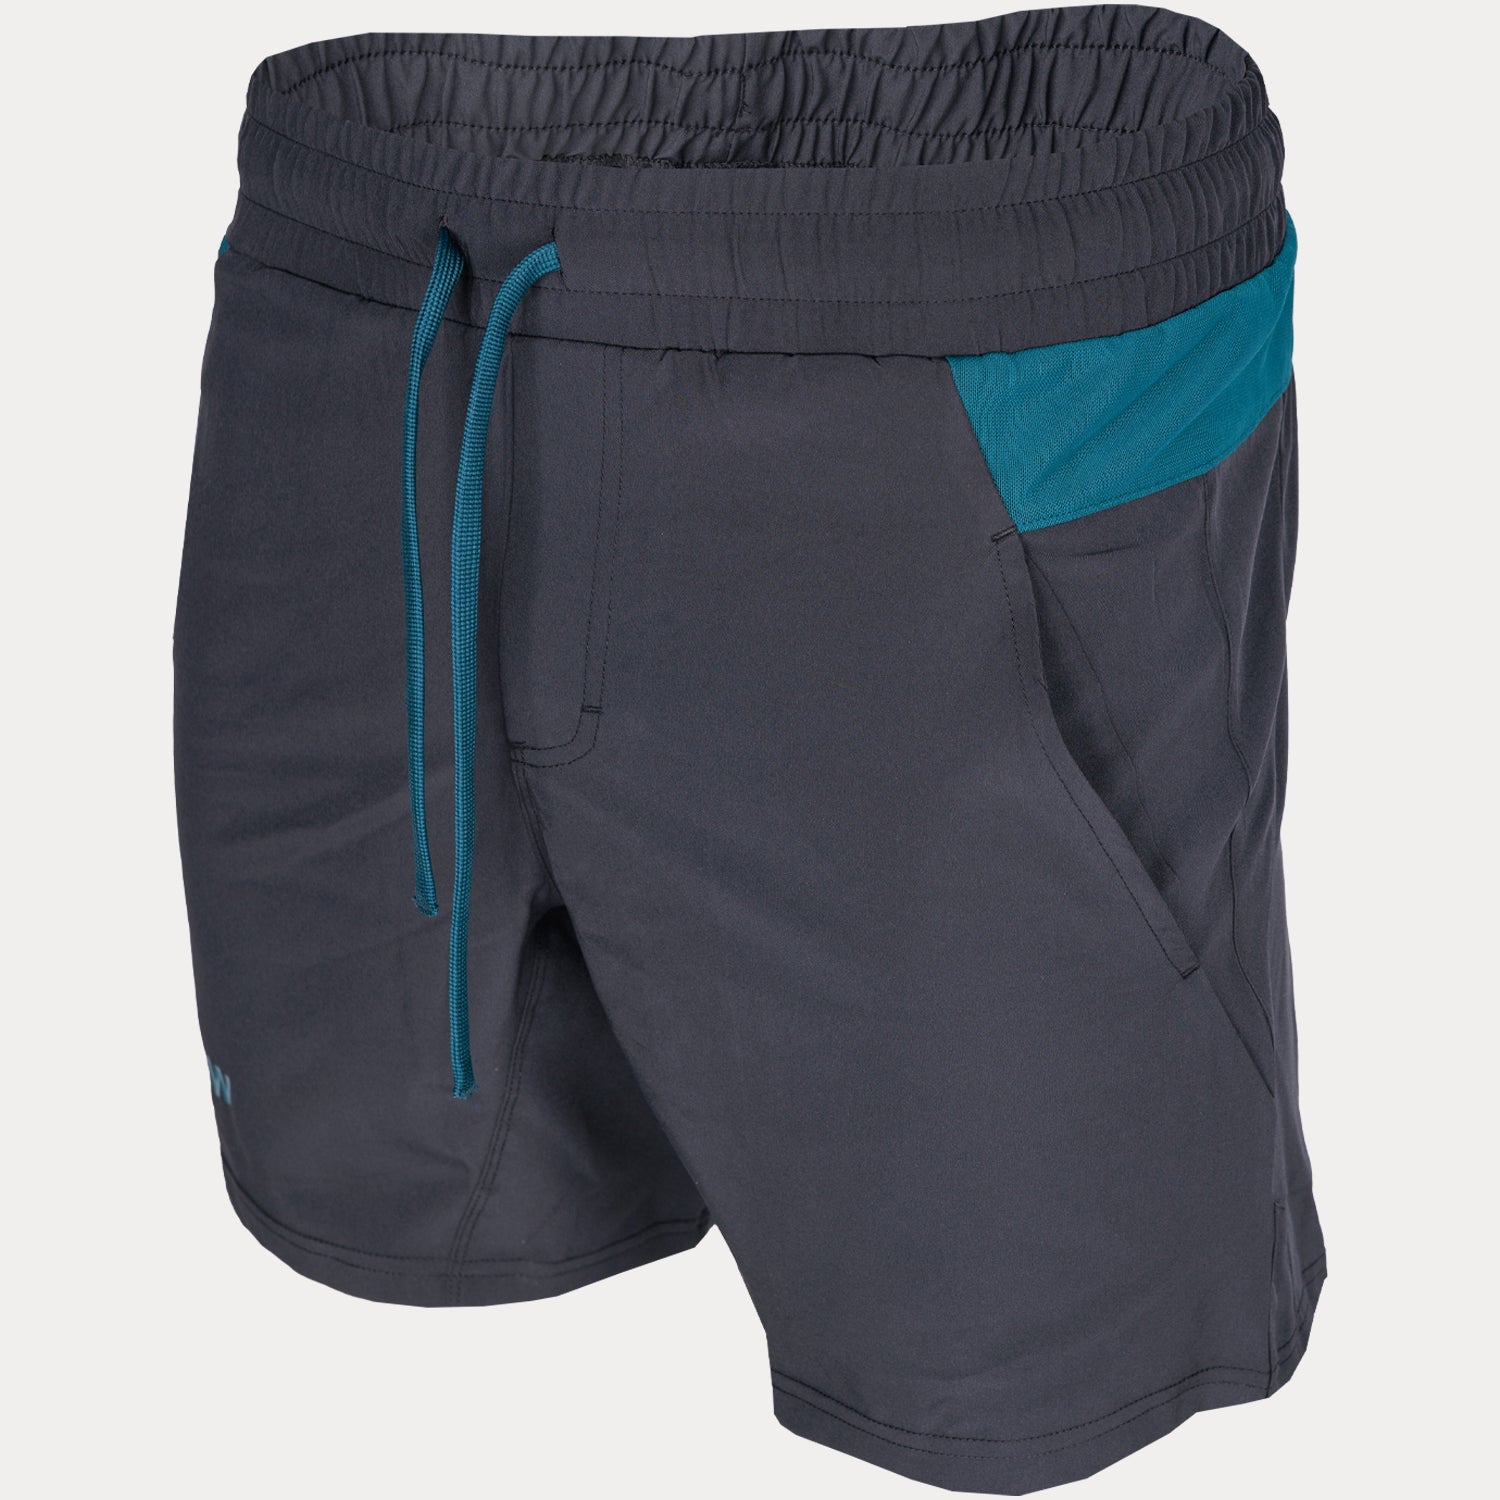 compression short in black with hydrow blue stripe and tie string 